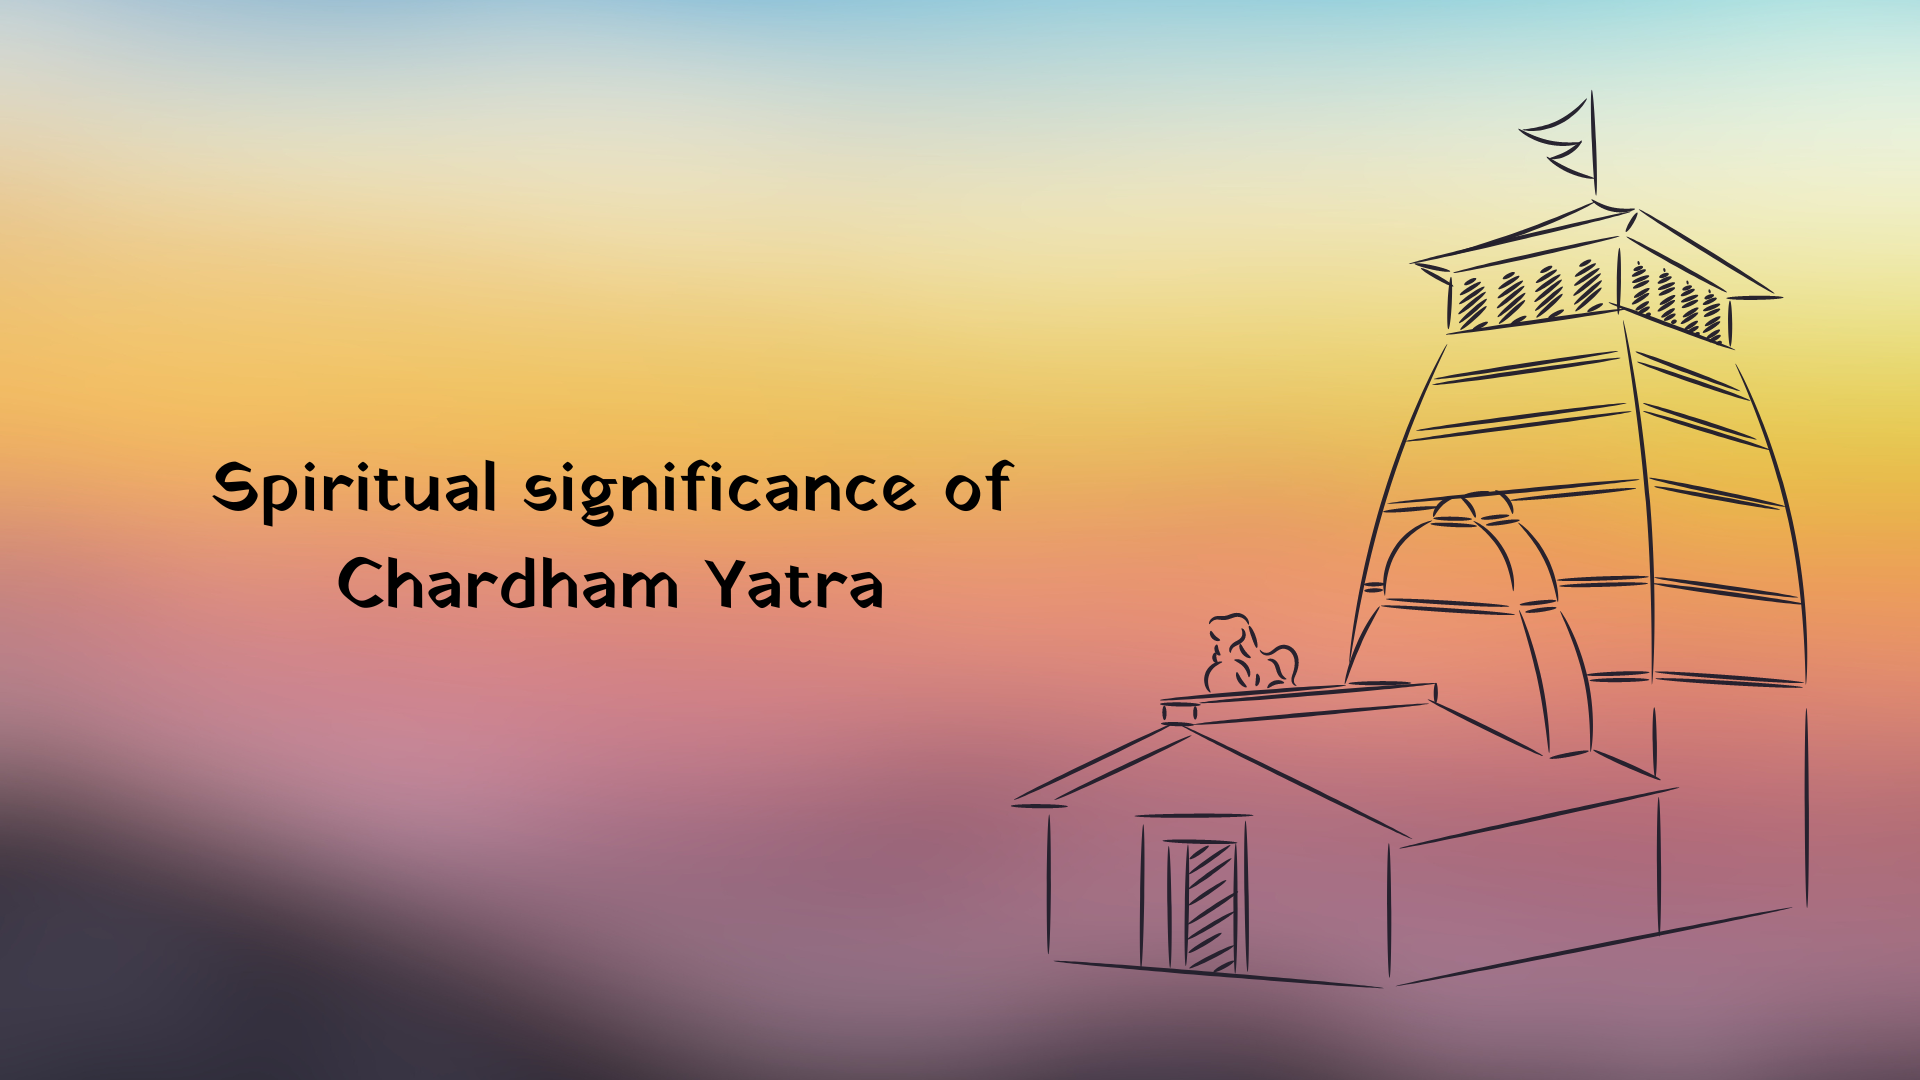 The Spiritual Significance of Chardham Yatra in India